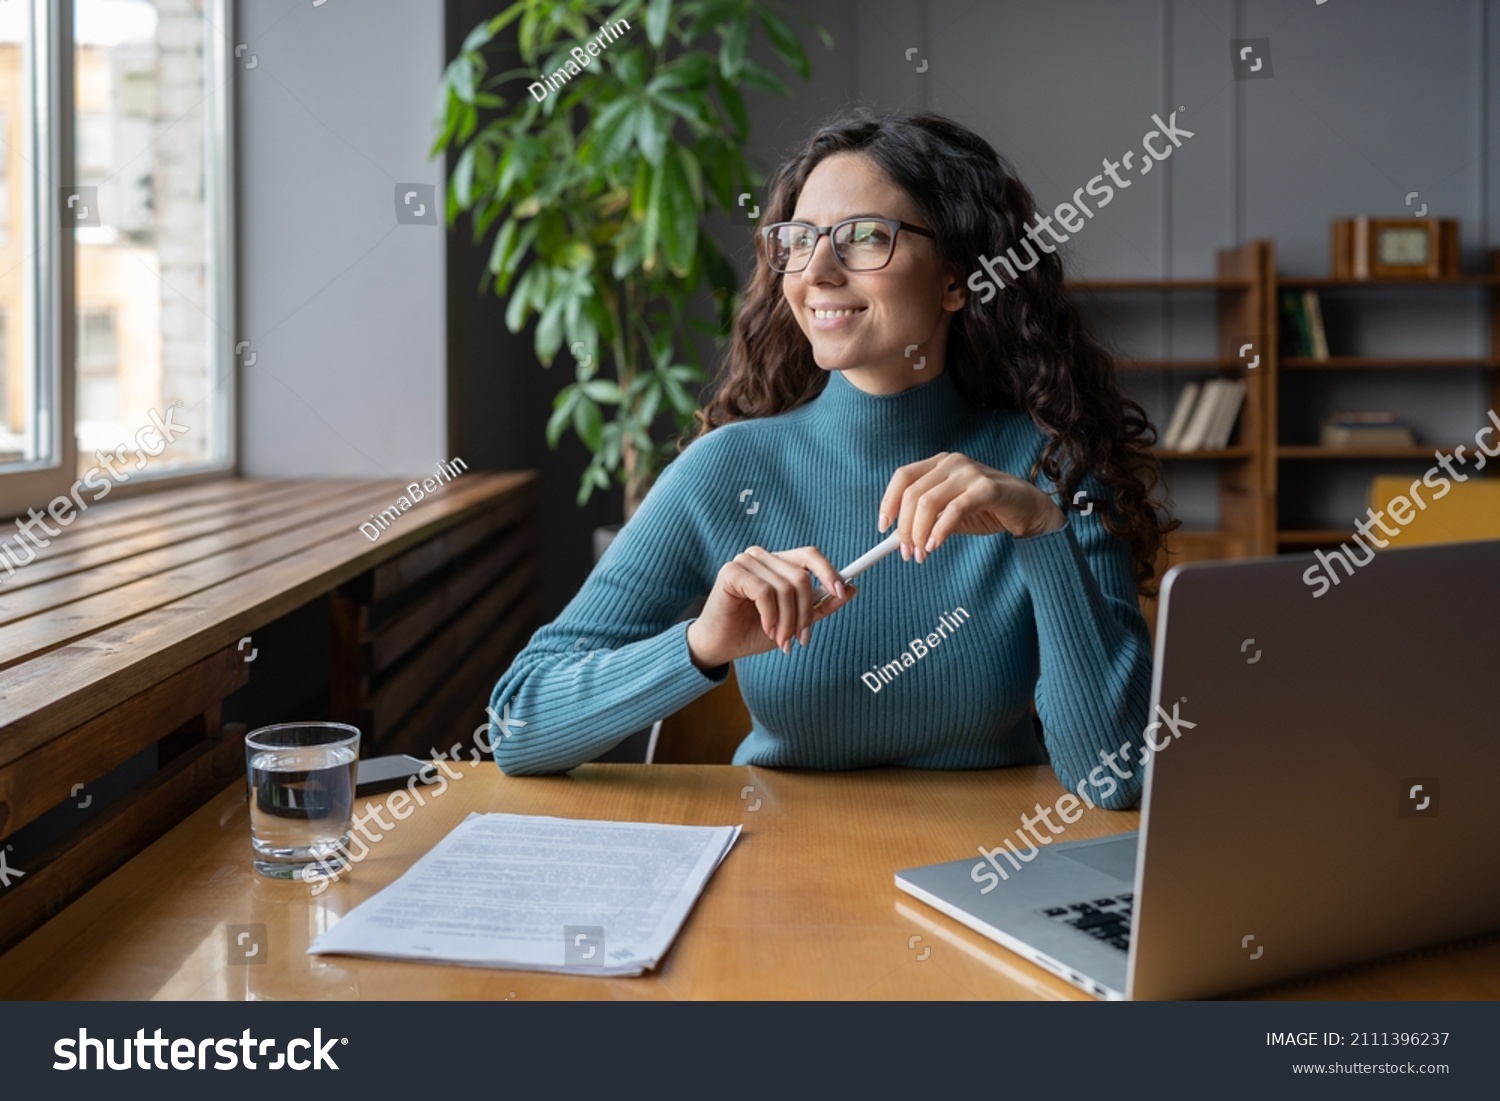 Positive happy female employee resting at workplace, looking away from computer screen. Relaxed woman office worker taking break to refresh mind and prevent stress during workday. Employee wellbeing #2111396237